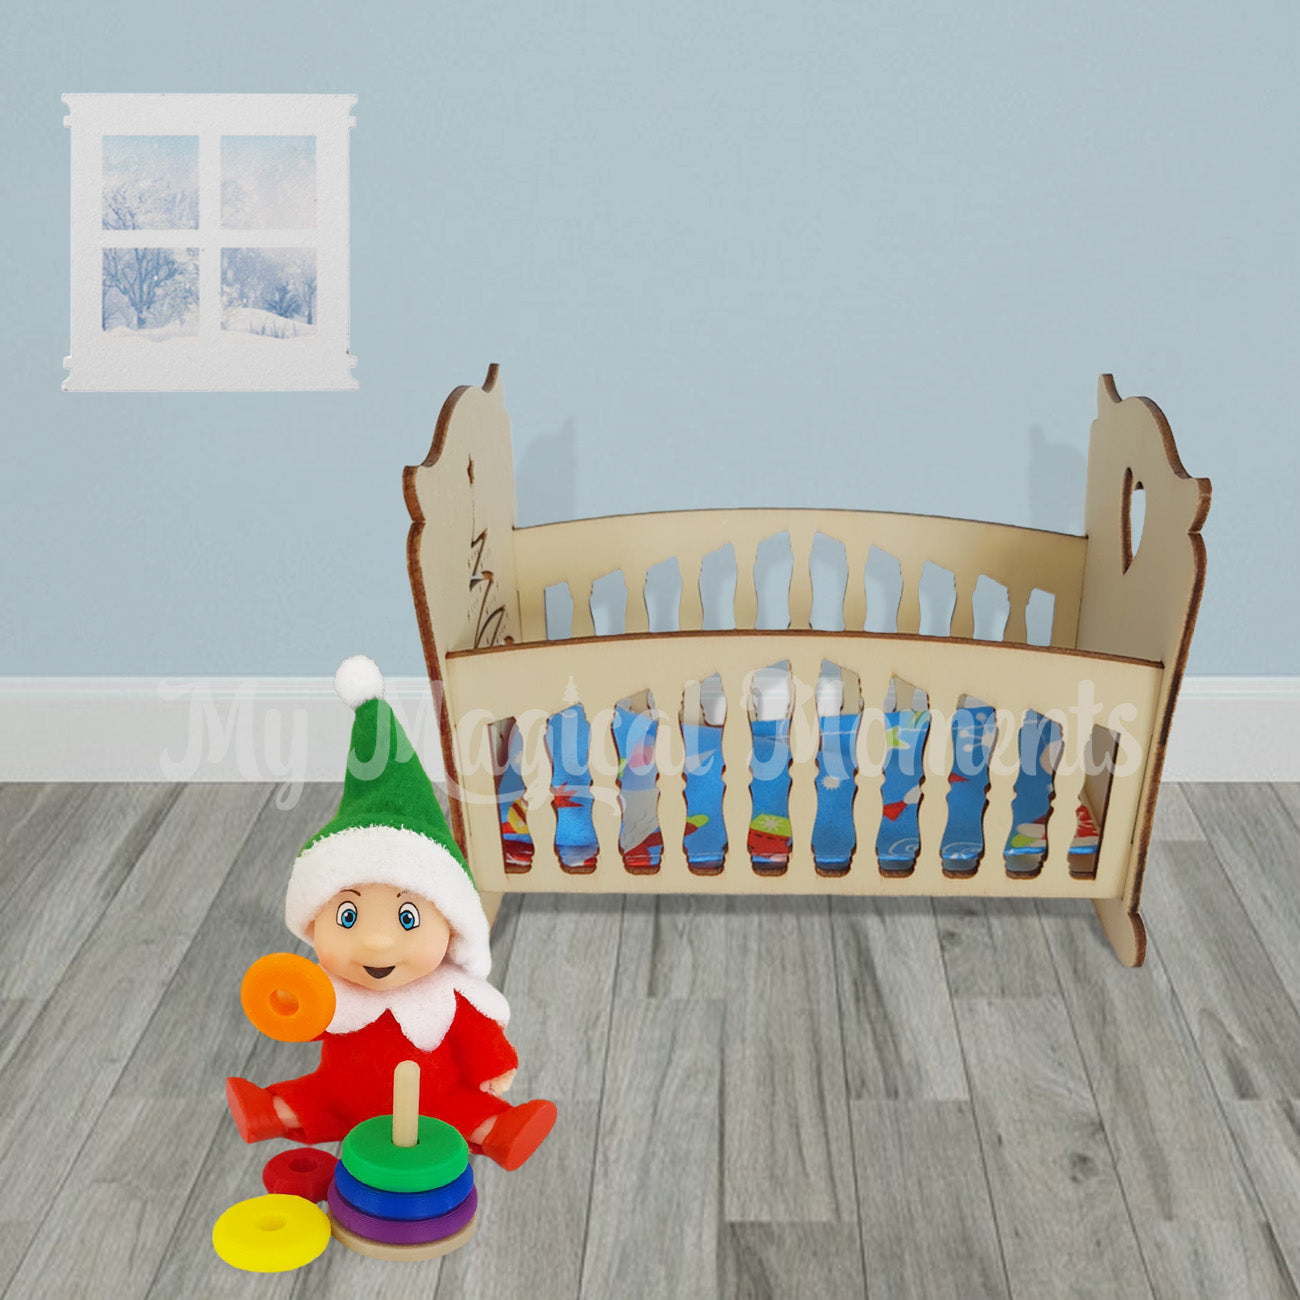 Elf baby playing with a ring stacker prop